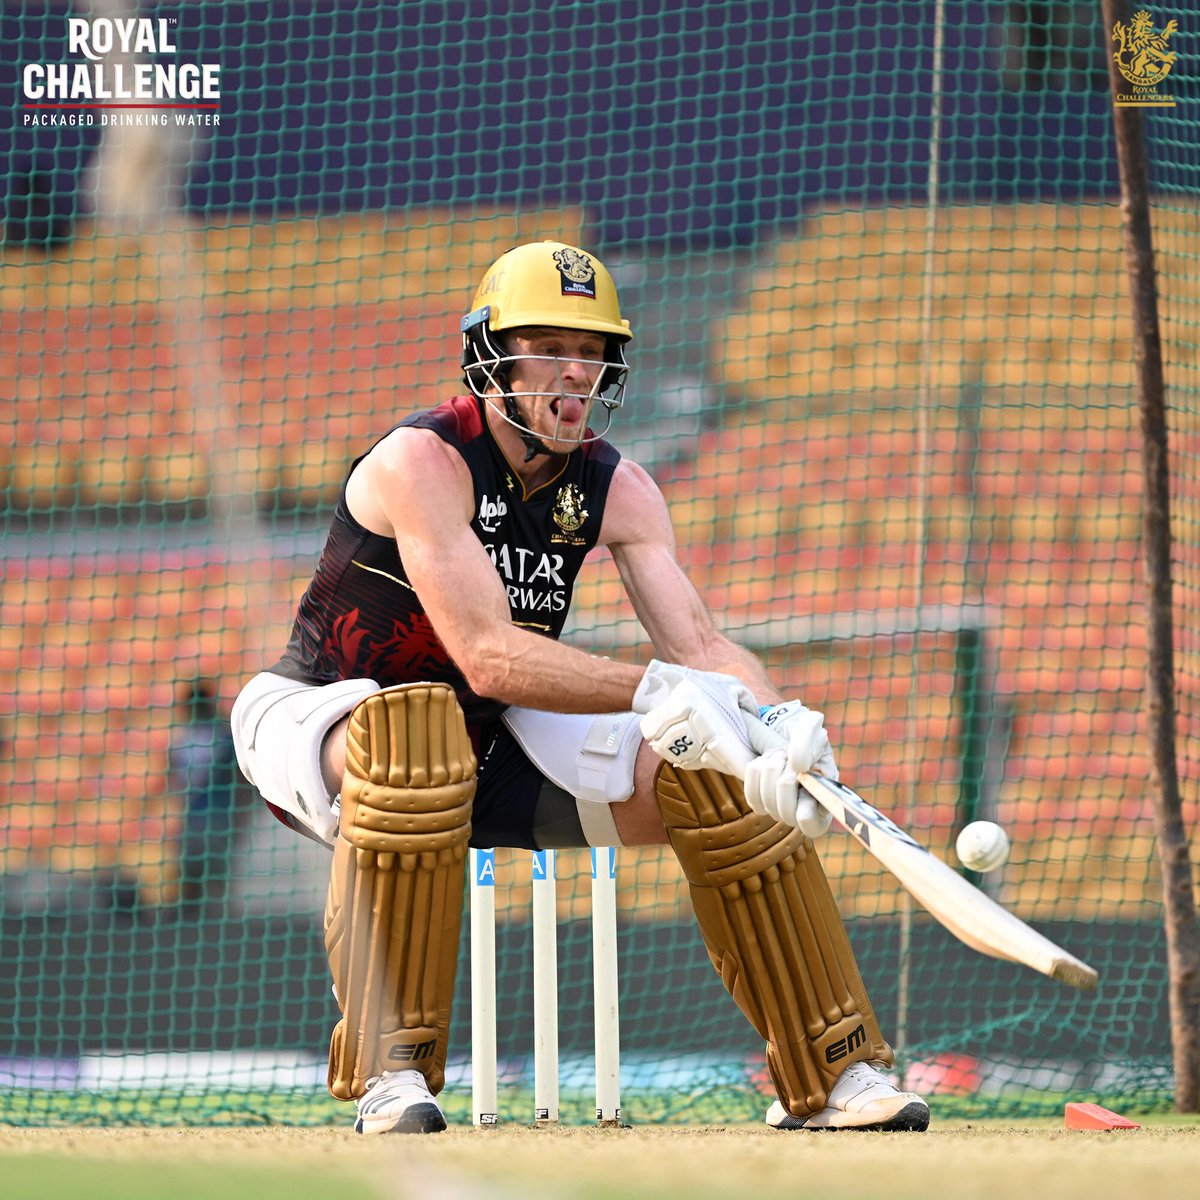 Royal Challenge Packaged Drinking Water Moment of the Day 📸

When @david_willey is about to go on a 𝗥𝗮𝗺𝗽age! ⛏️

#PlayBold #ನಮ್ಮRCB #IPL2023 #Choosebold #RoyalChallenge